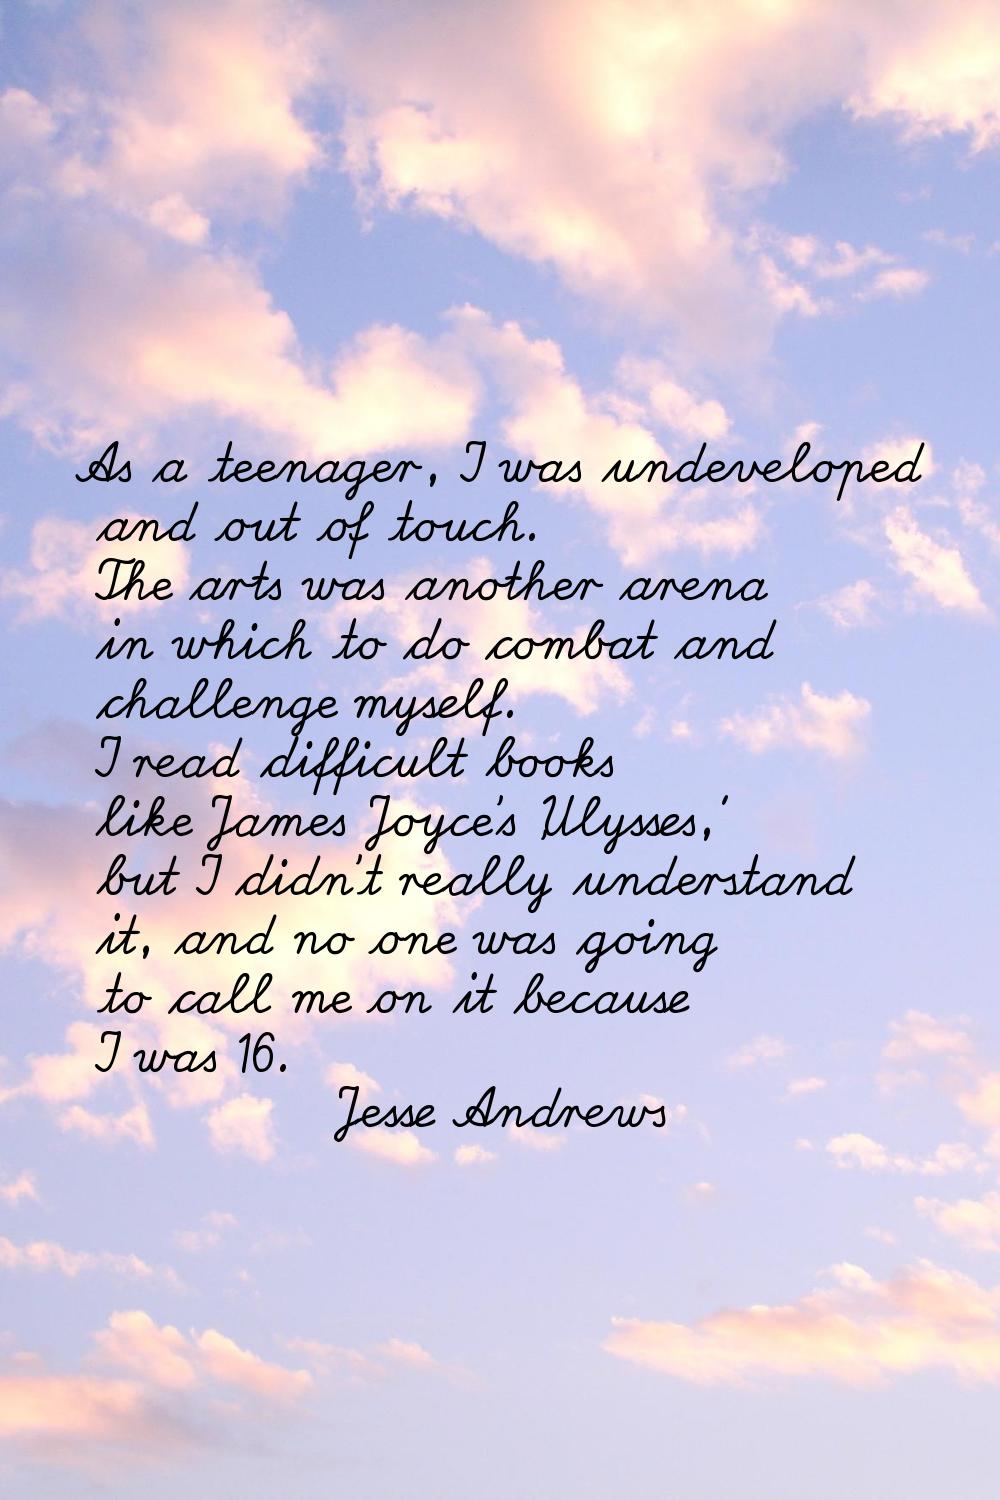 As a teenager, I was undeveloped and out of touch. The arts was another arena in which to do combat